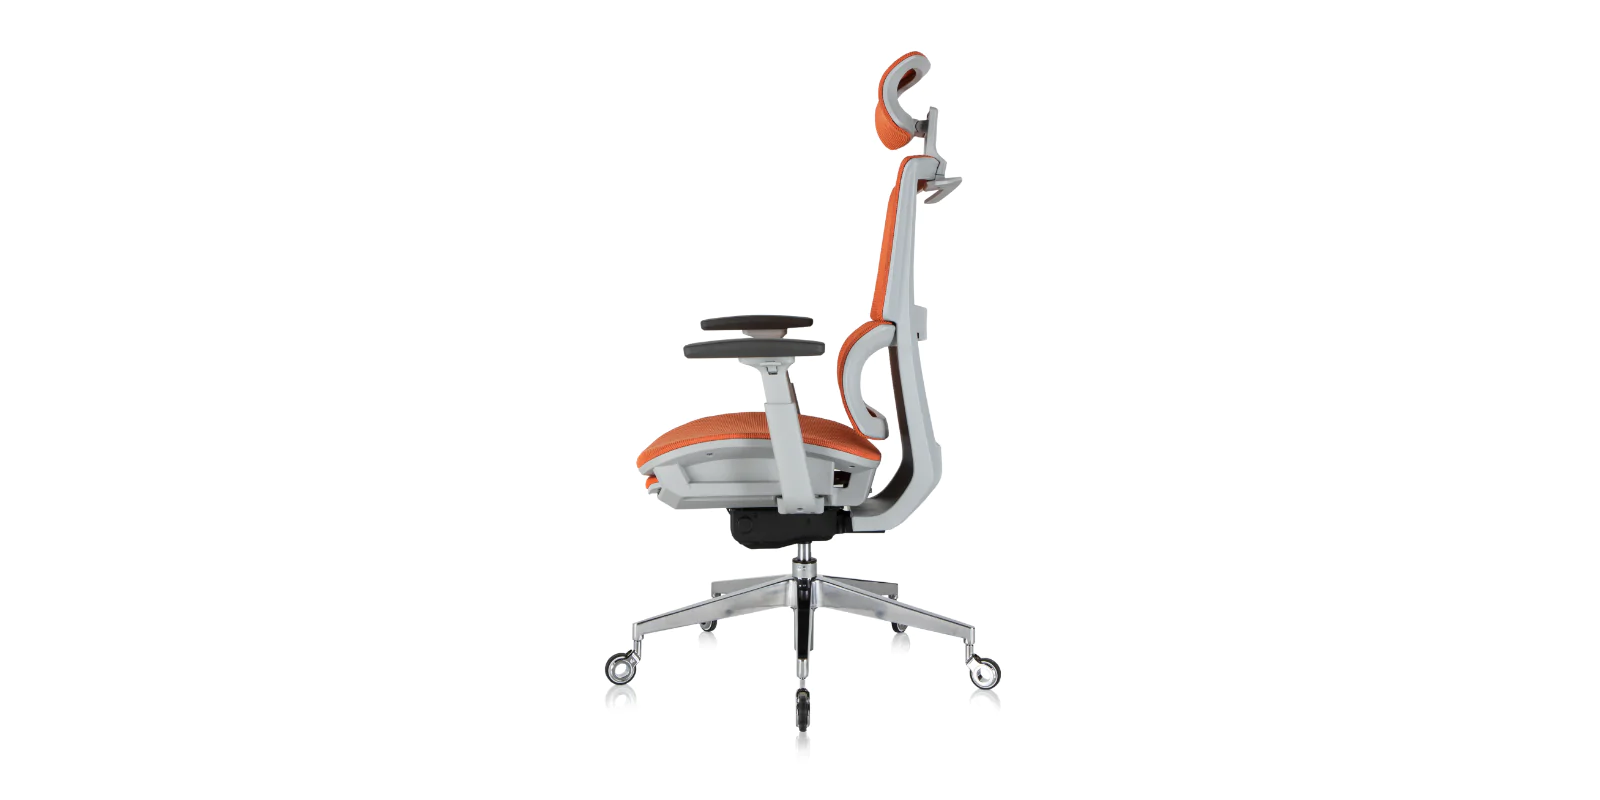 Is it better to have an office chair with or without arms?